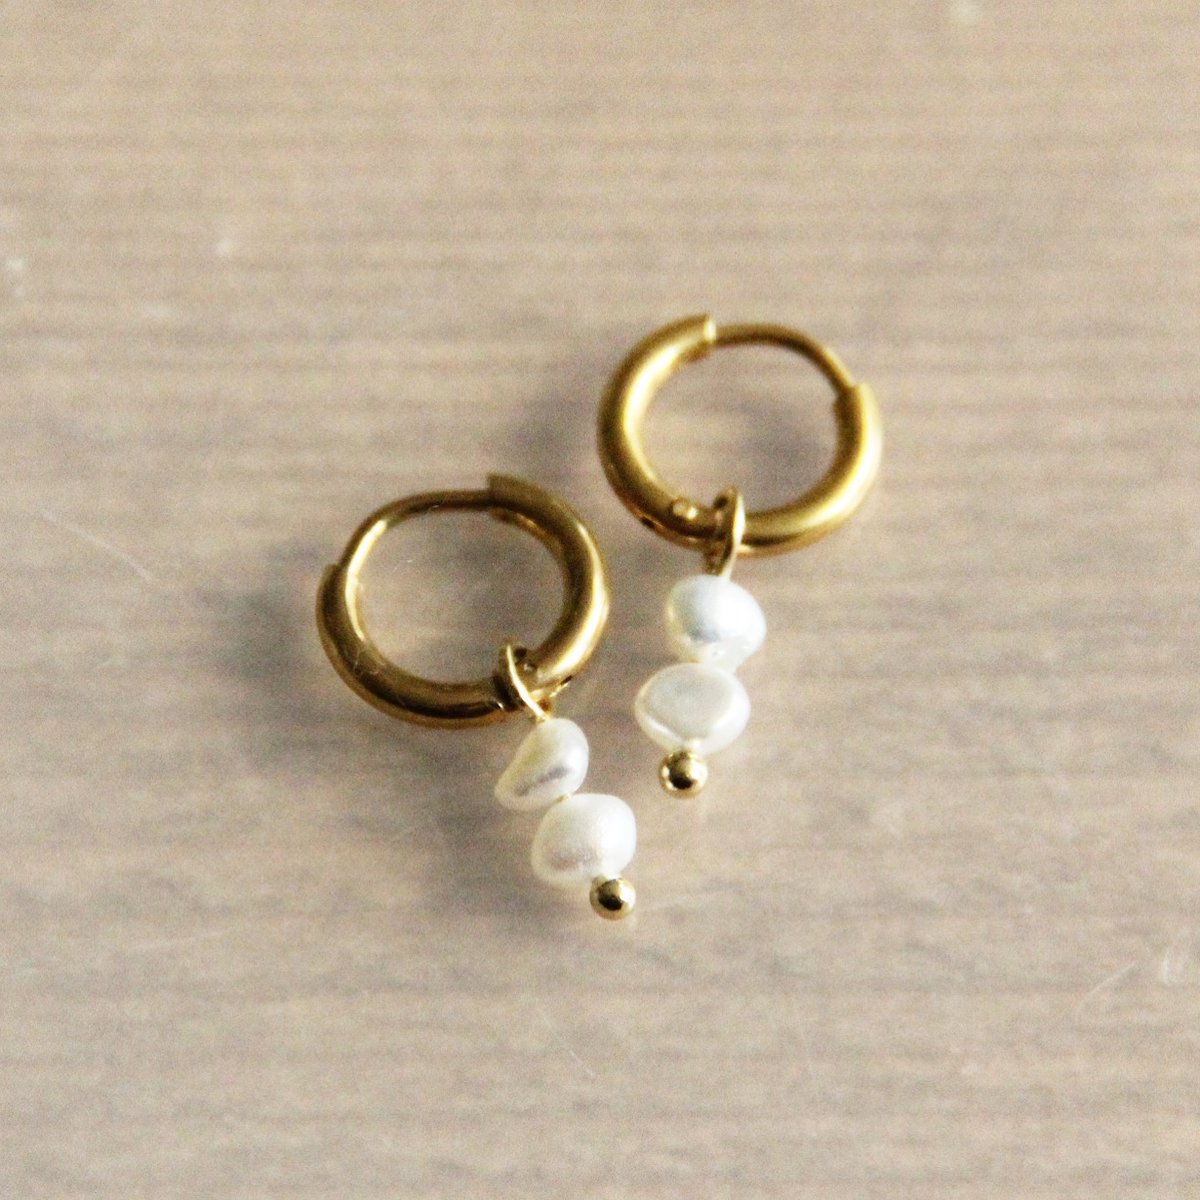 SS352 - Stainless steel creoles with 2 freshwater pearls - gold